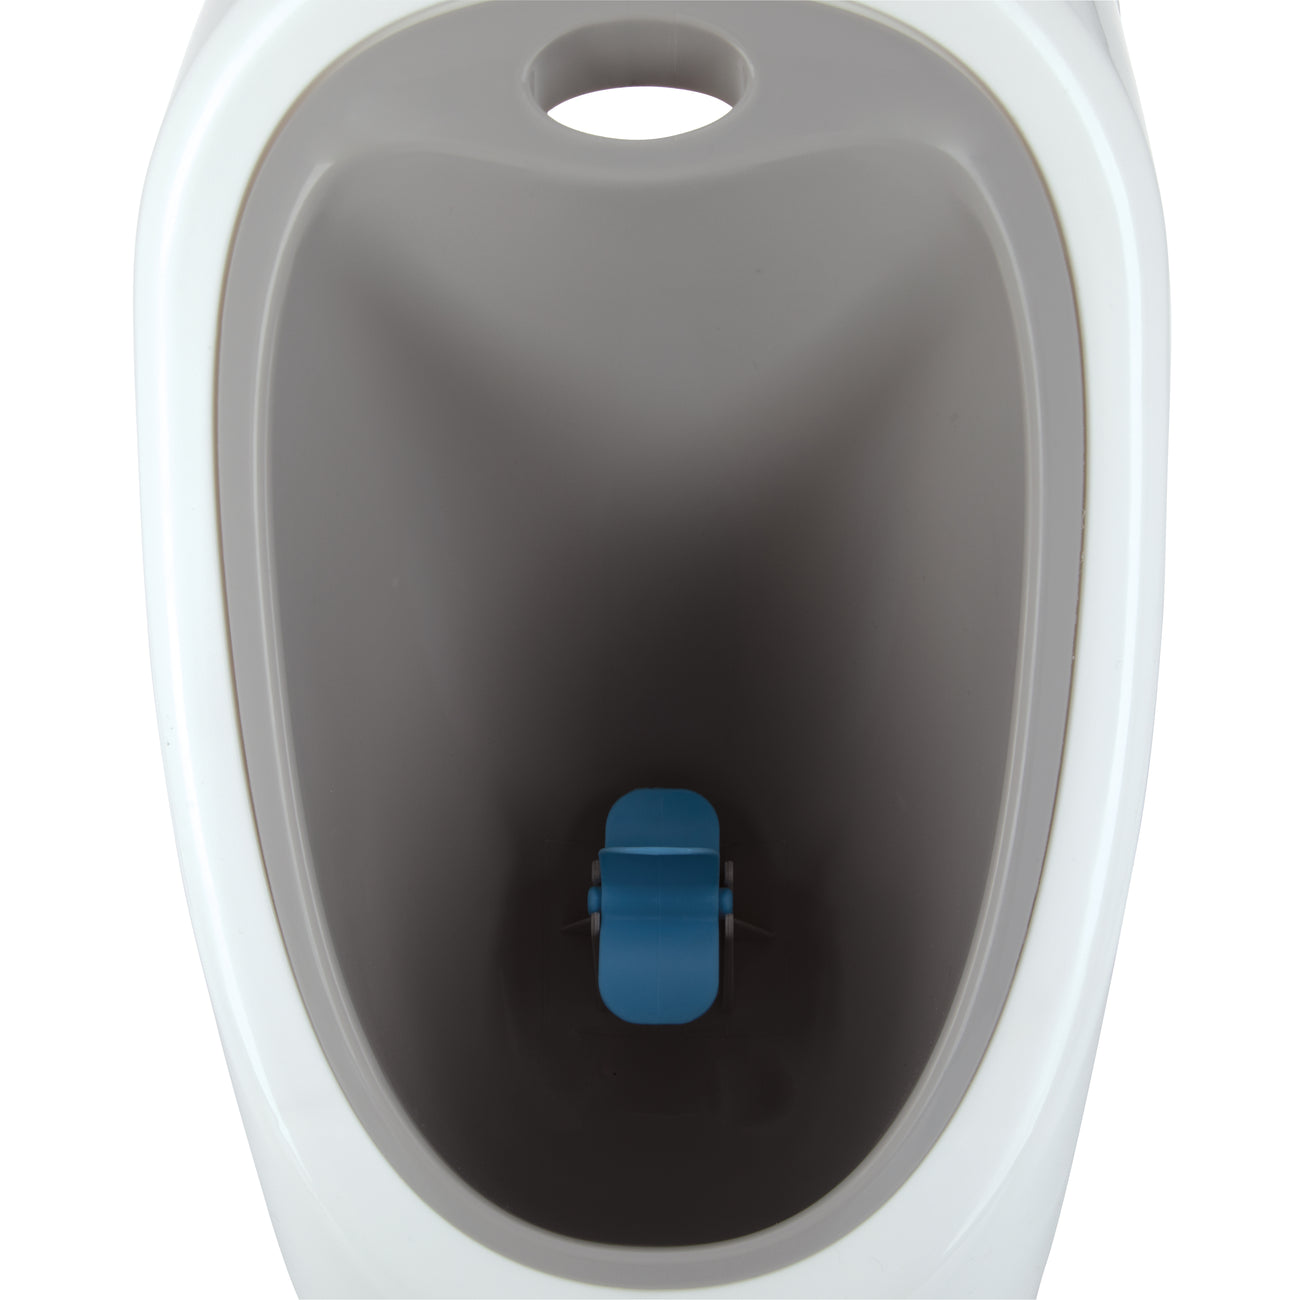 My Real Urinal Potty Training Toilet for Boys - Nuby US